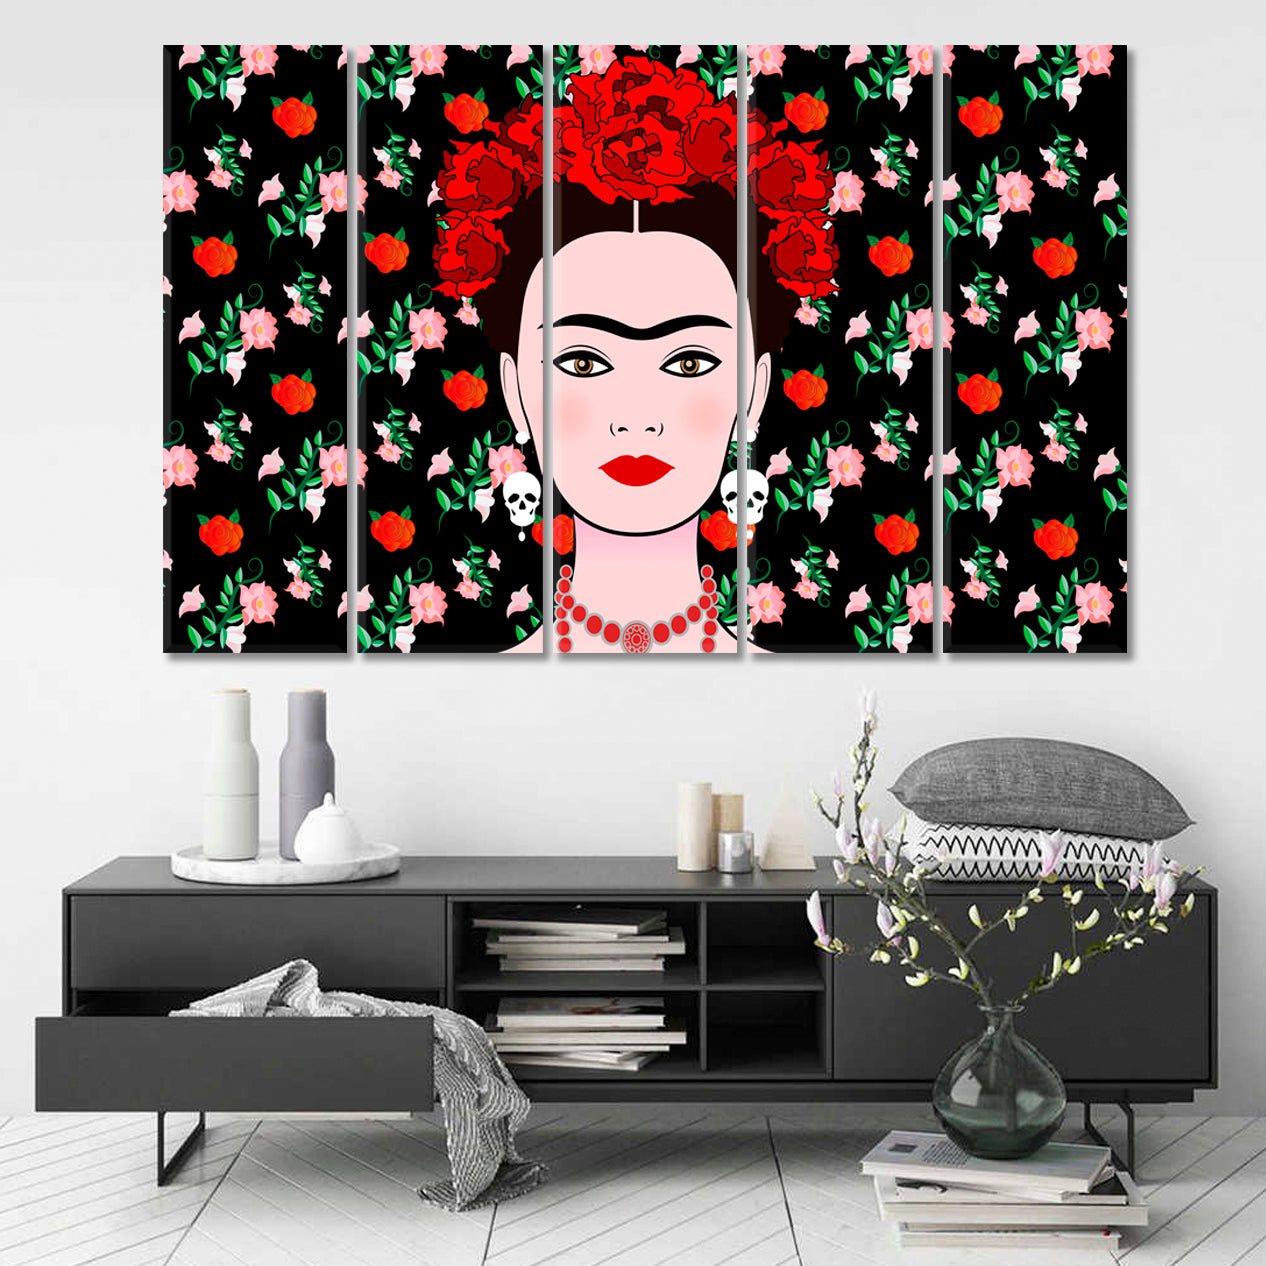 FRIDA KAHLO Portrait  Young Beautiful Mexican Woman Traditional Hairstyle Mexican Earrings Skulls Floral Background People Portrait Wall Hangings Artesty 5 panels 36" x 24" 